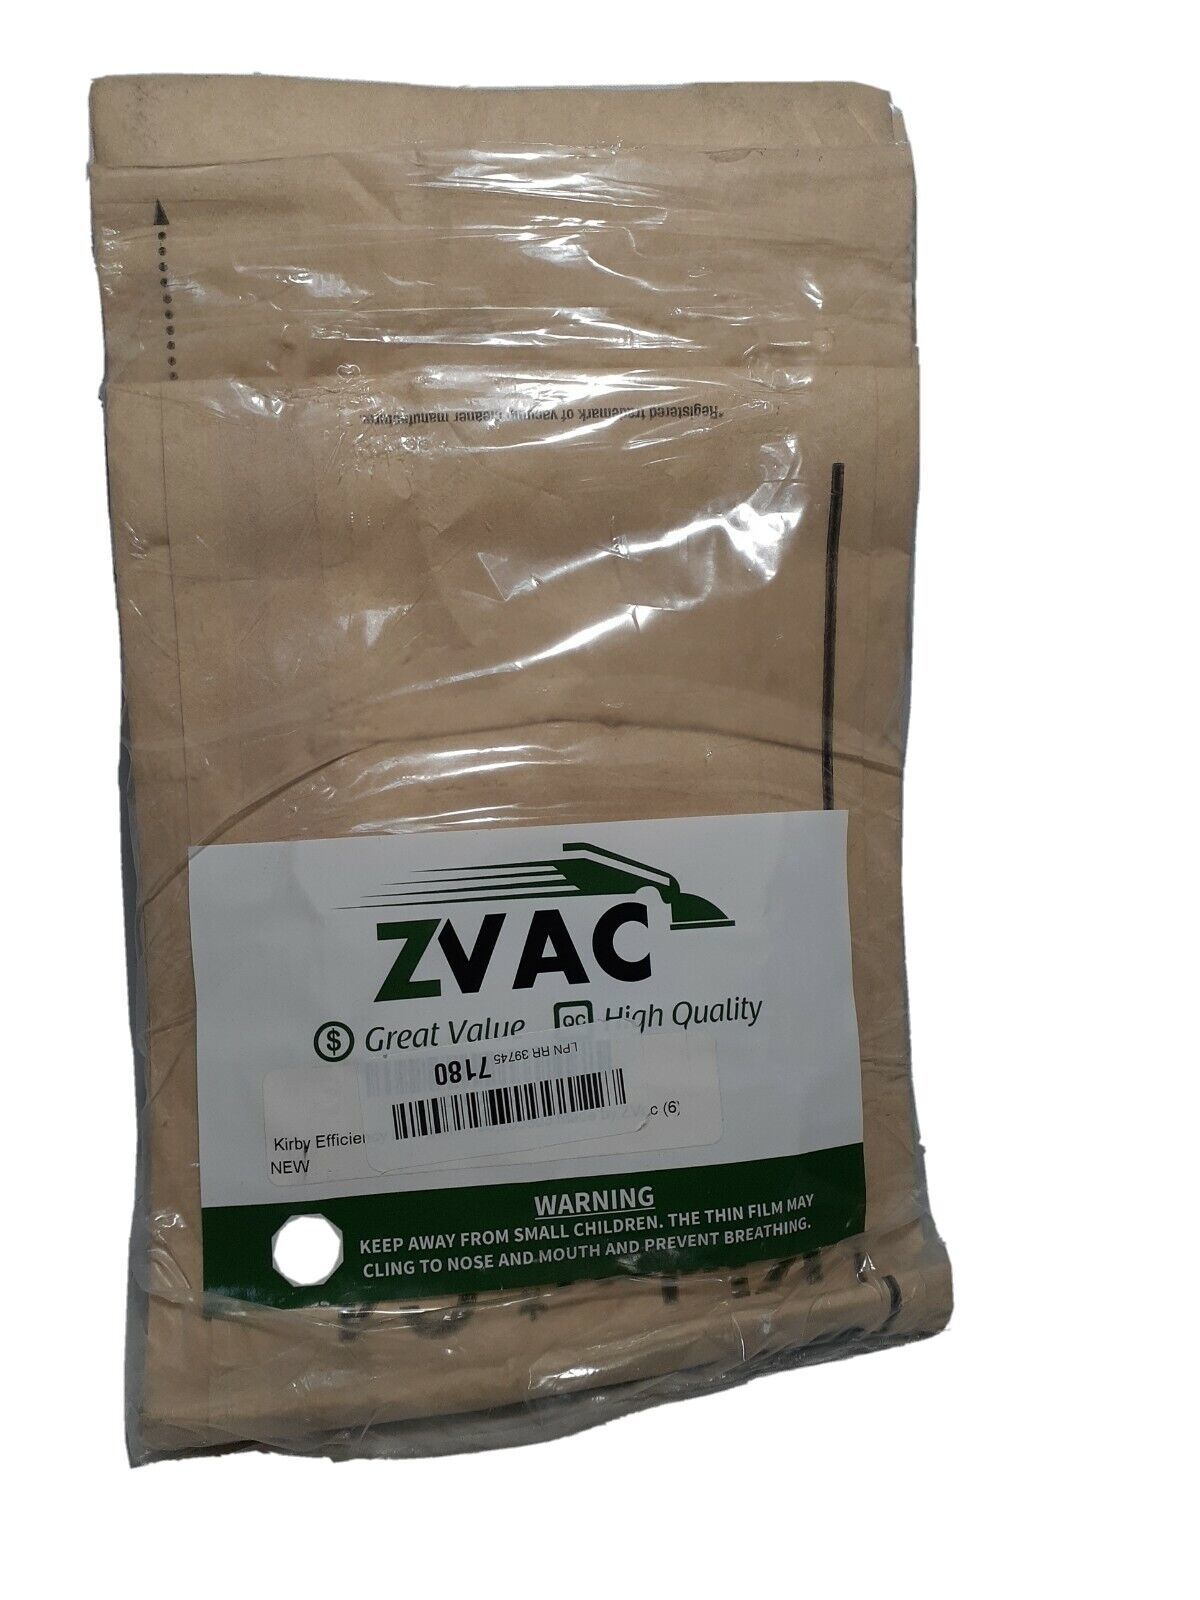 6 ZVac  Bags for Kirby G4 Vacuum Cleaner Bags - $6.11